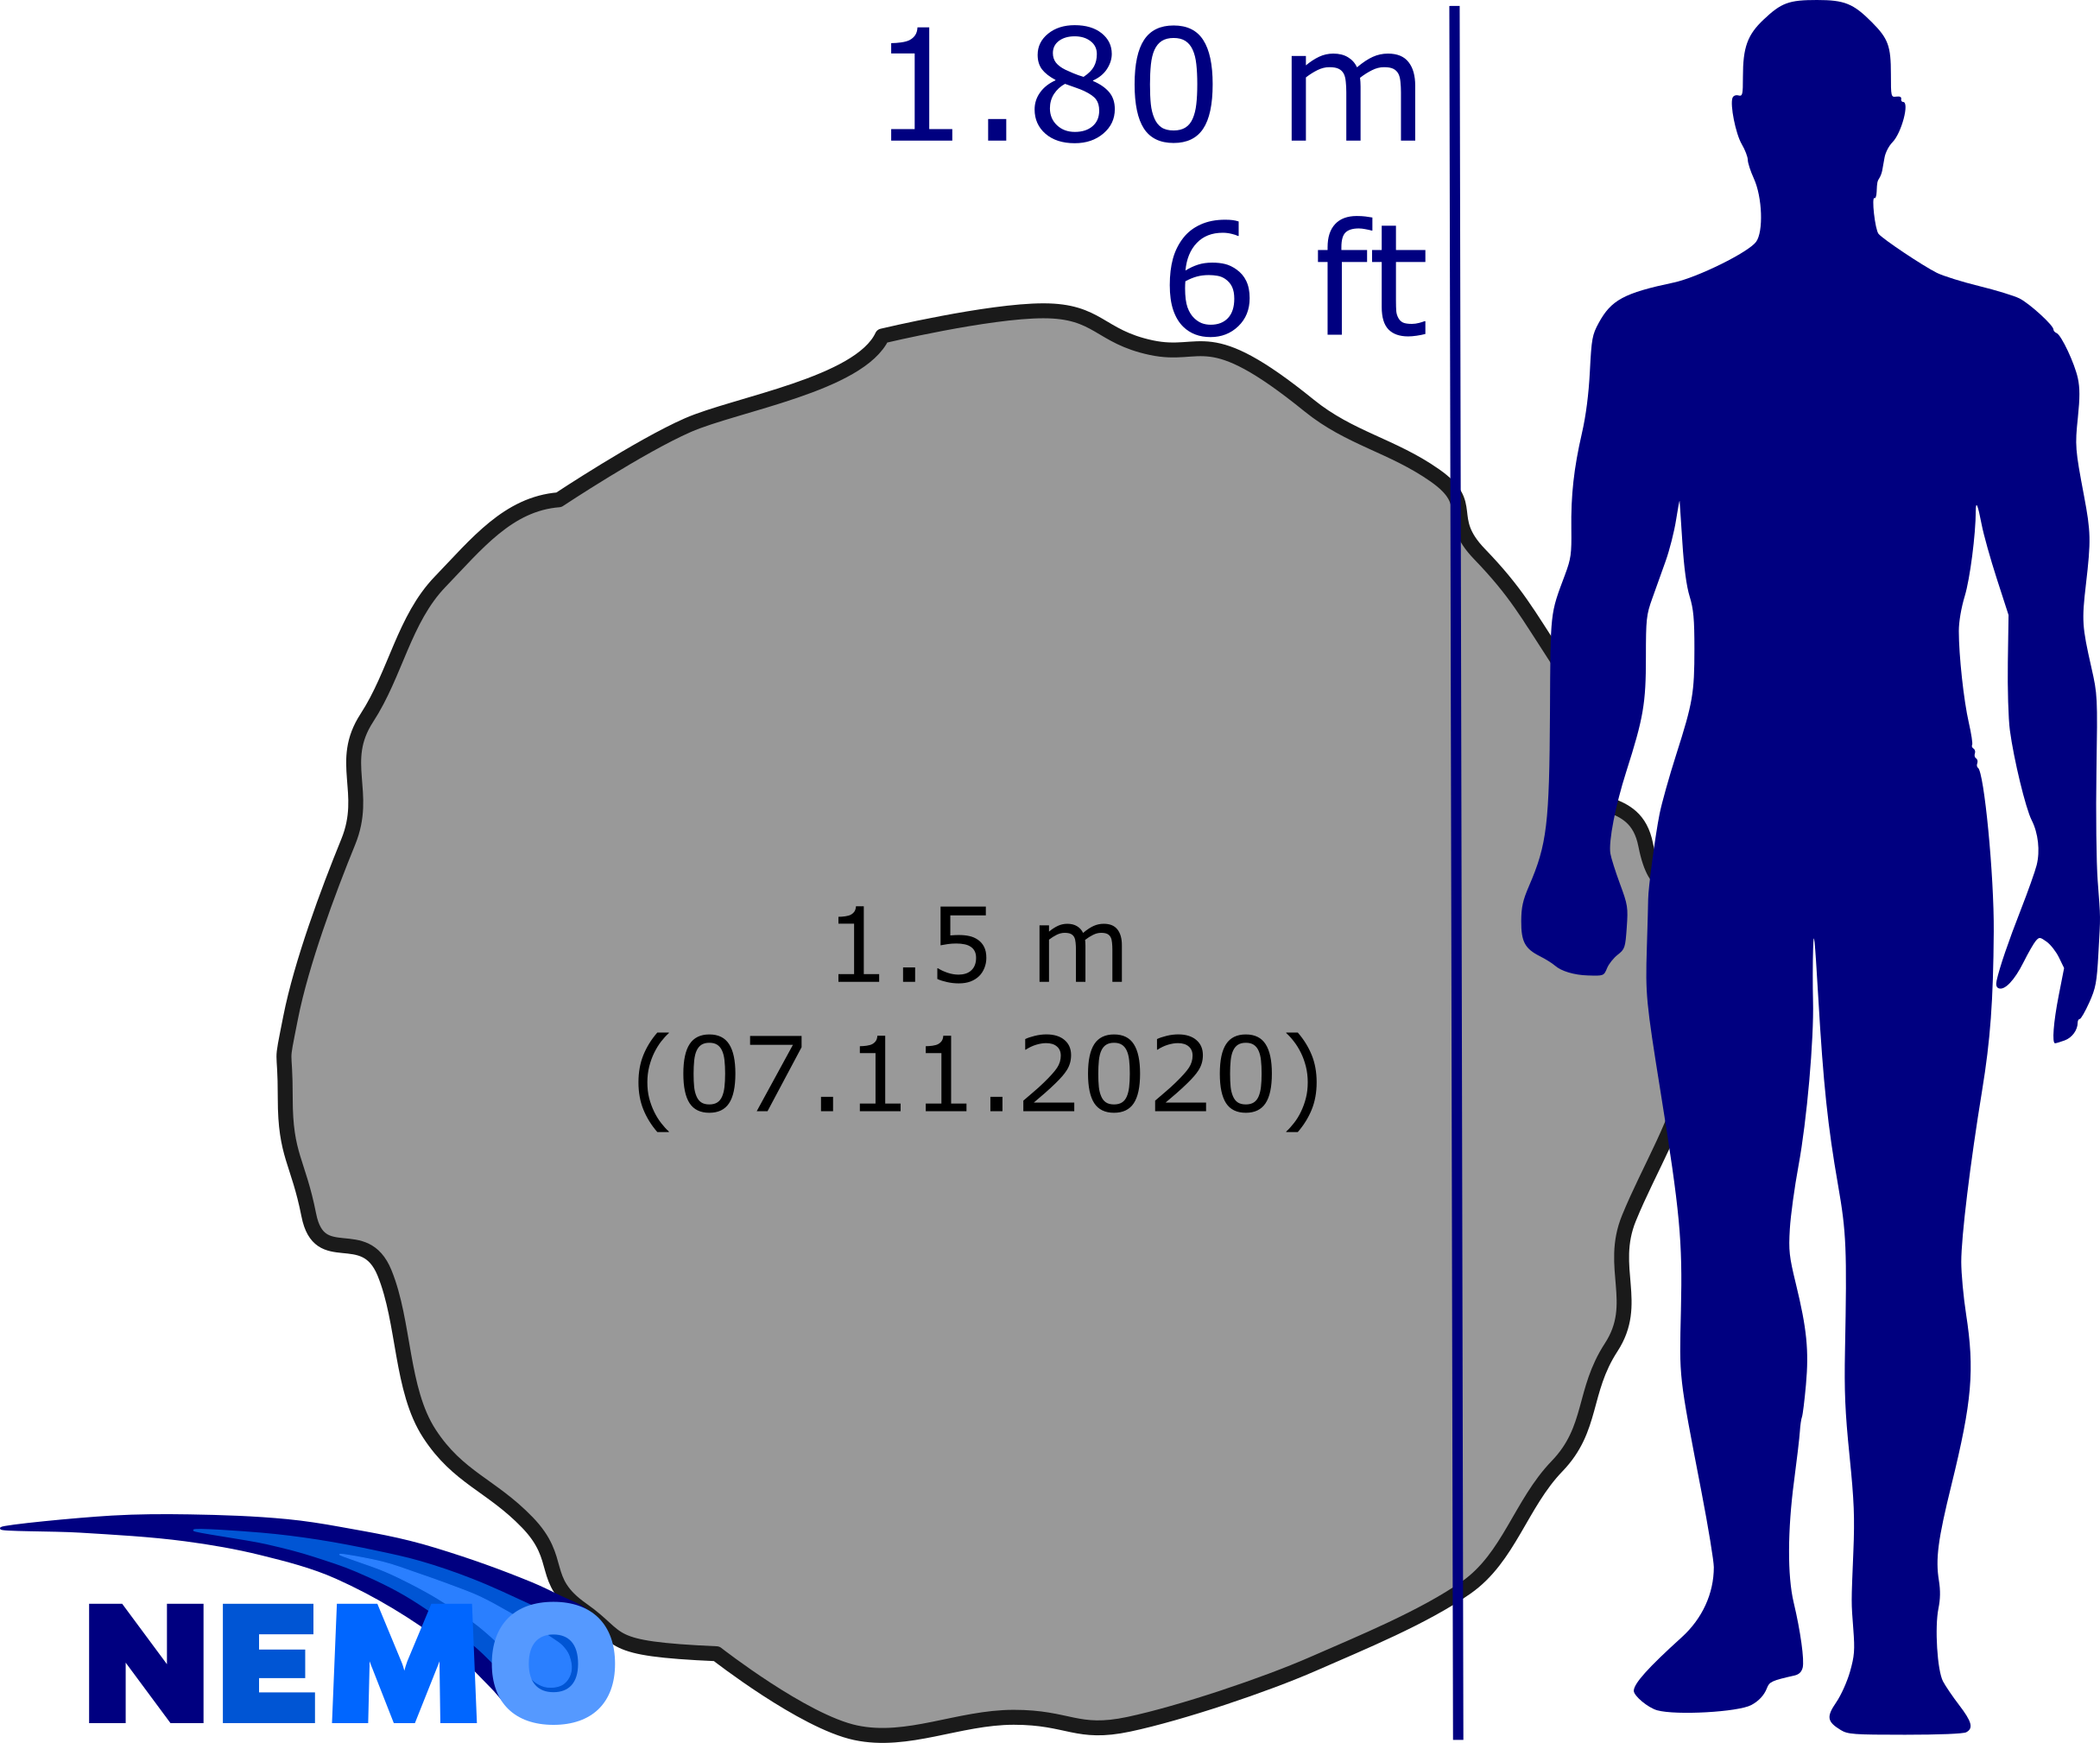 Asteroid size estimation of the entering object that created the fireball visible above Sweden on 07.11.2020.